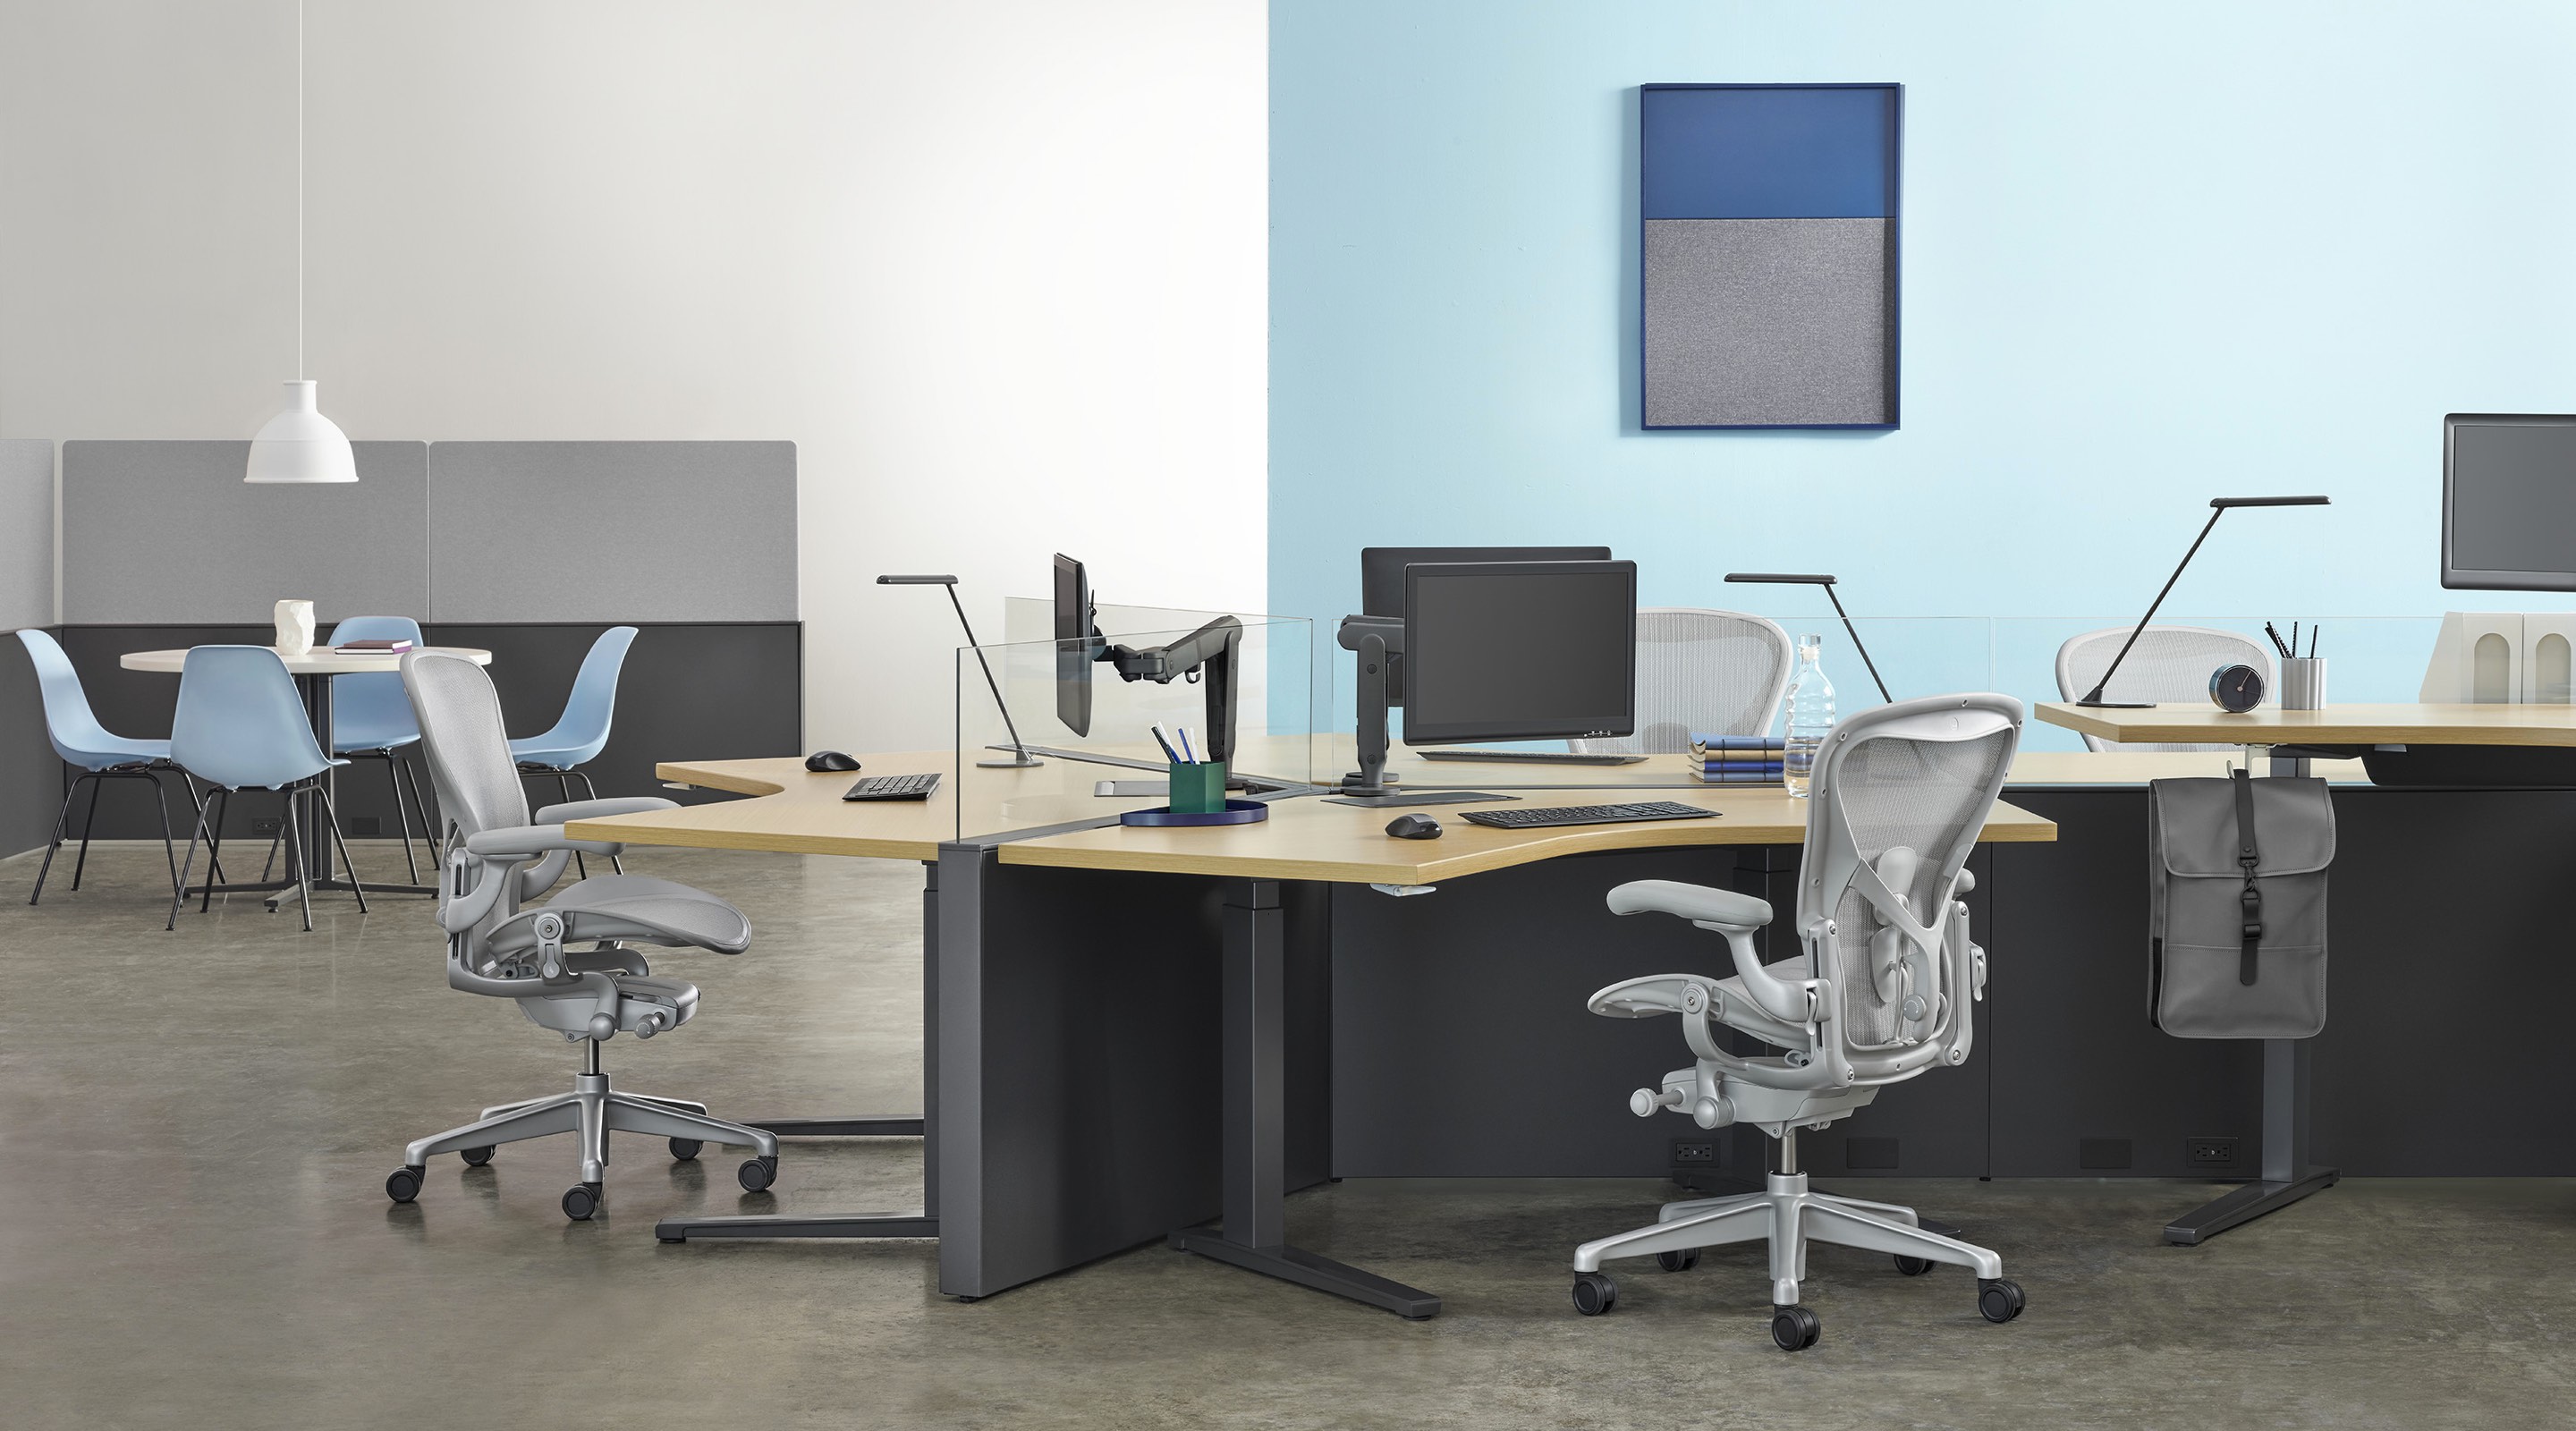 https://www.hermanmiller.com/content/dam/hmicom/page_assets/products/canvas_office_landscape/lookbook/shared_workspaces/setting_1/ebr_can_shared_workspaces_setting_1.jpg